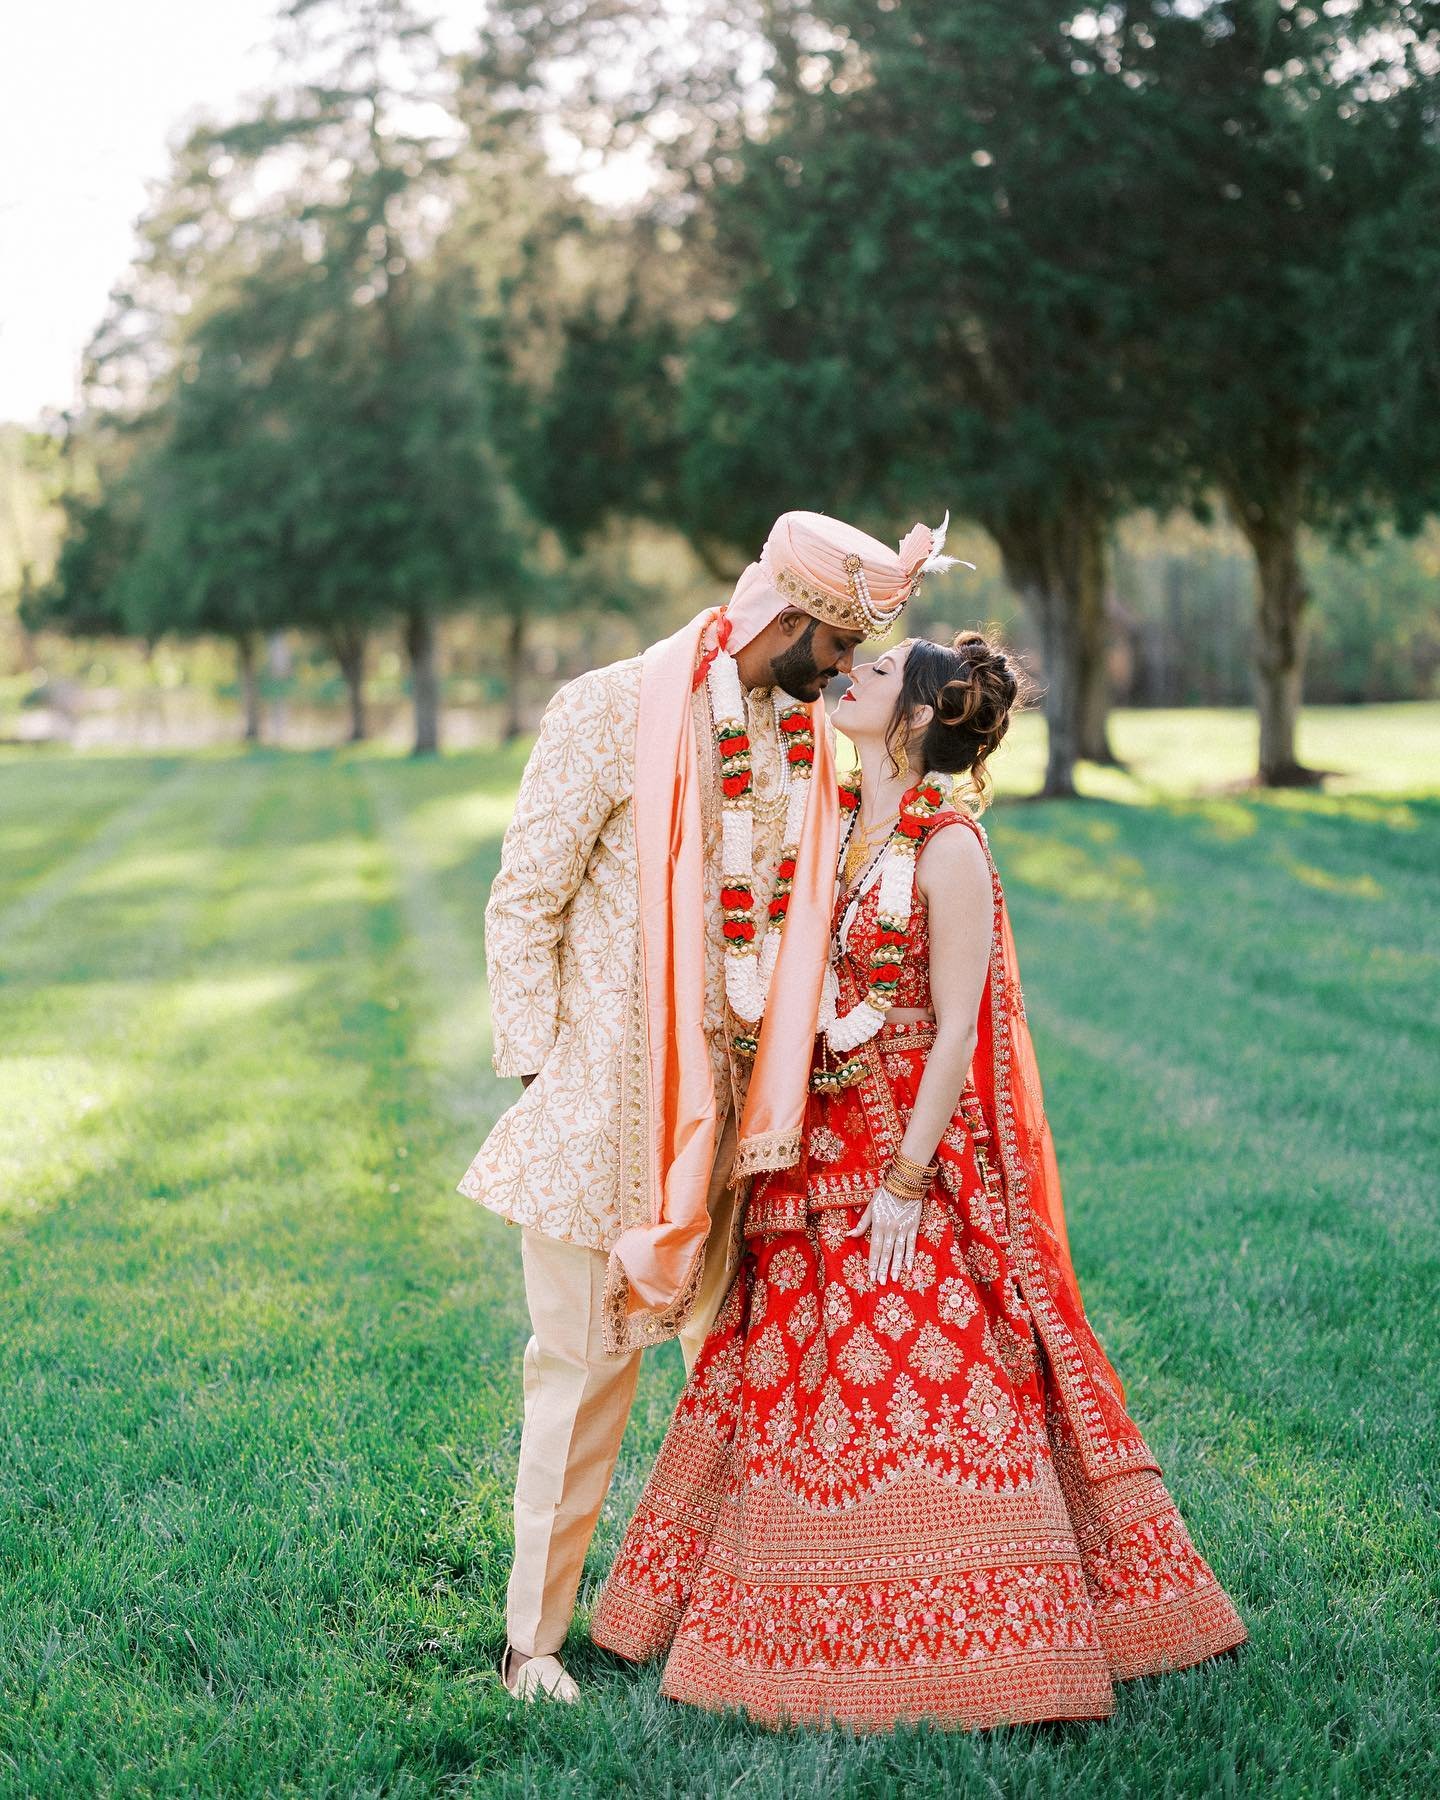 Our favorite magic moments from Genesis and Ken&rsquo;s beautiful Hindu/Guyanese ceremony. We&rsquo;re so grateful that they chose us to make unforgettable memories with!❤️✨

@casiemariephotography
@theperfectbridesmaidevents
@Charlotteweddingflowers